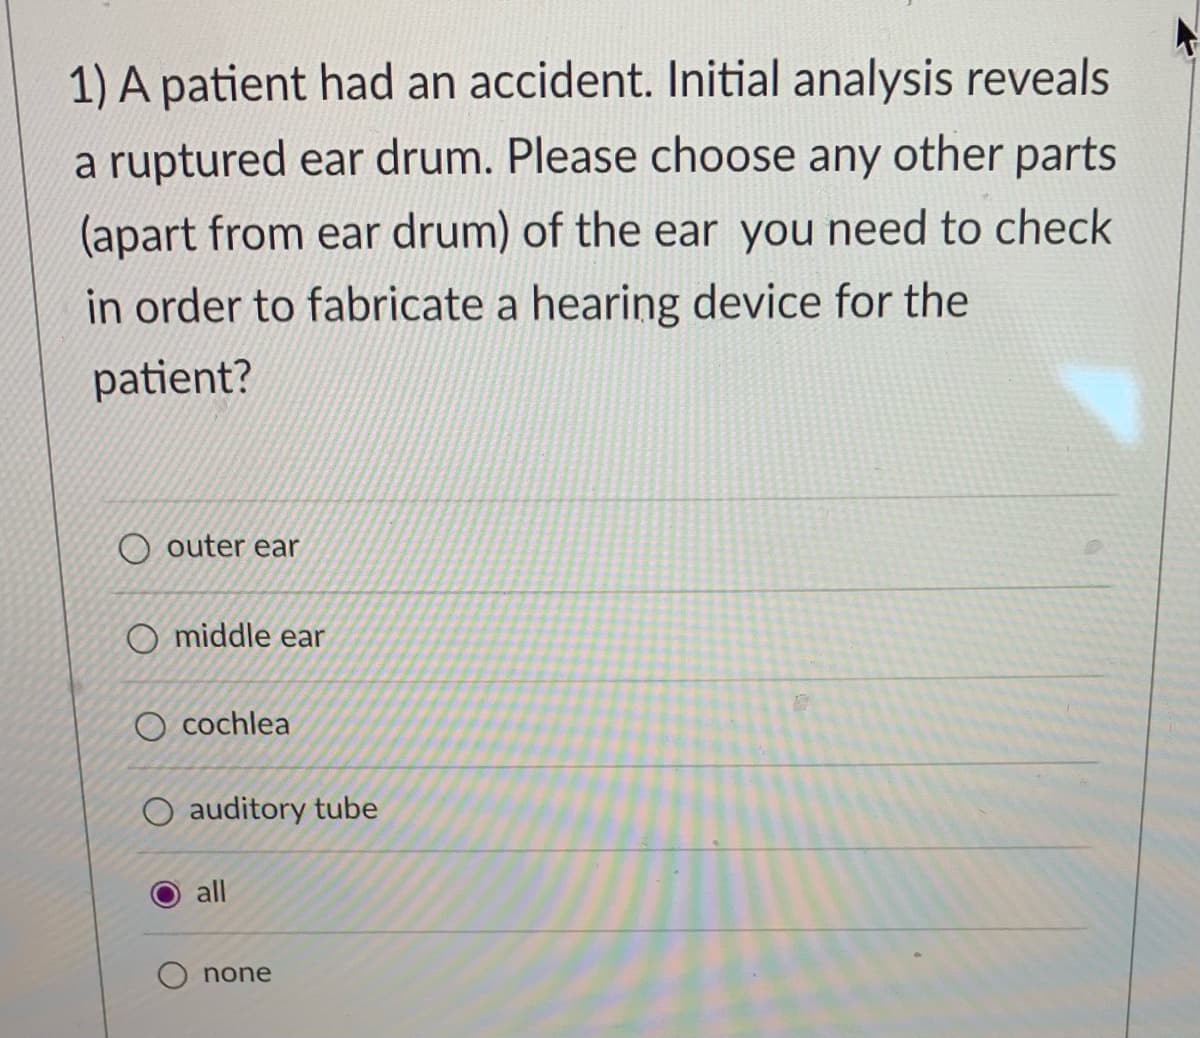 1) A patient had an accident. Initial analysis reveals
a ruptured ear drum. Please choose any other parts
(apart from ear drum) of the ear you need to check
in order to fabricate a hearing device for the
patient?
O outer ear
O middle ear
O cochlea
auditory tube
all
O none
